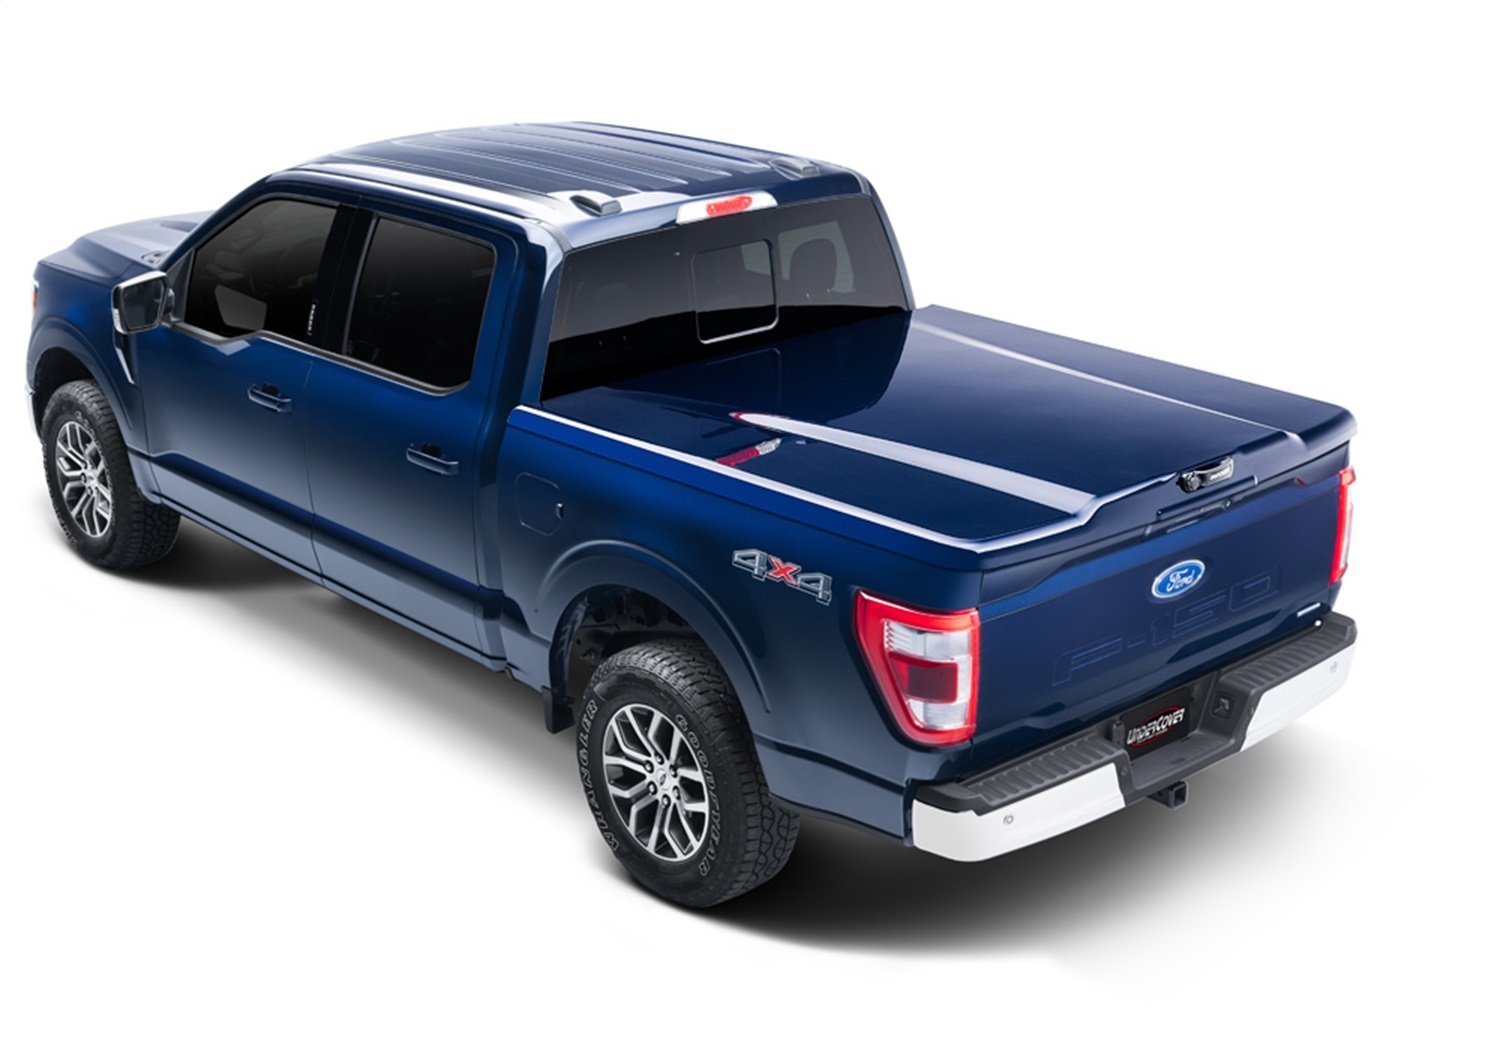 UC2208L-HX Elite LX Hard Non-Folding Cover, Fits Select Ford F-150 5'7" Bed Crew (Includes Lightning) HX Antimatter Blue